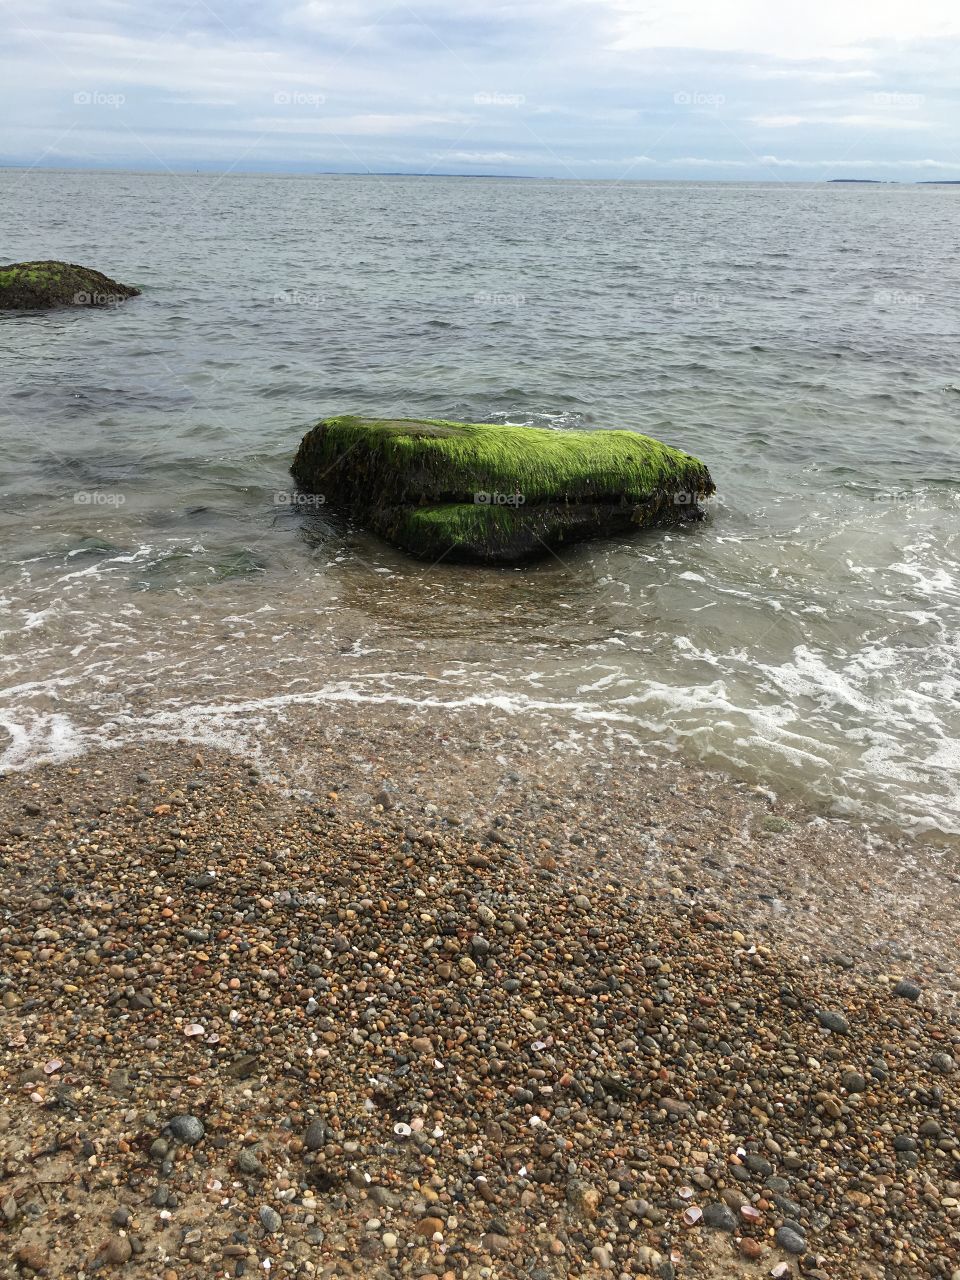 Mossy rock at the beach